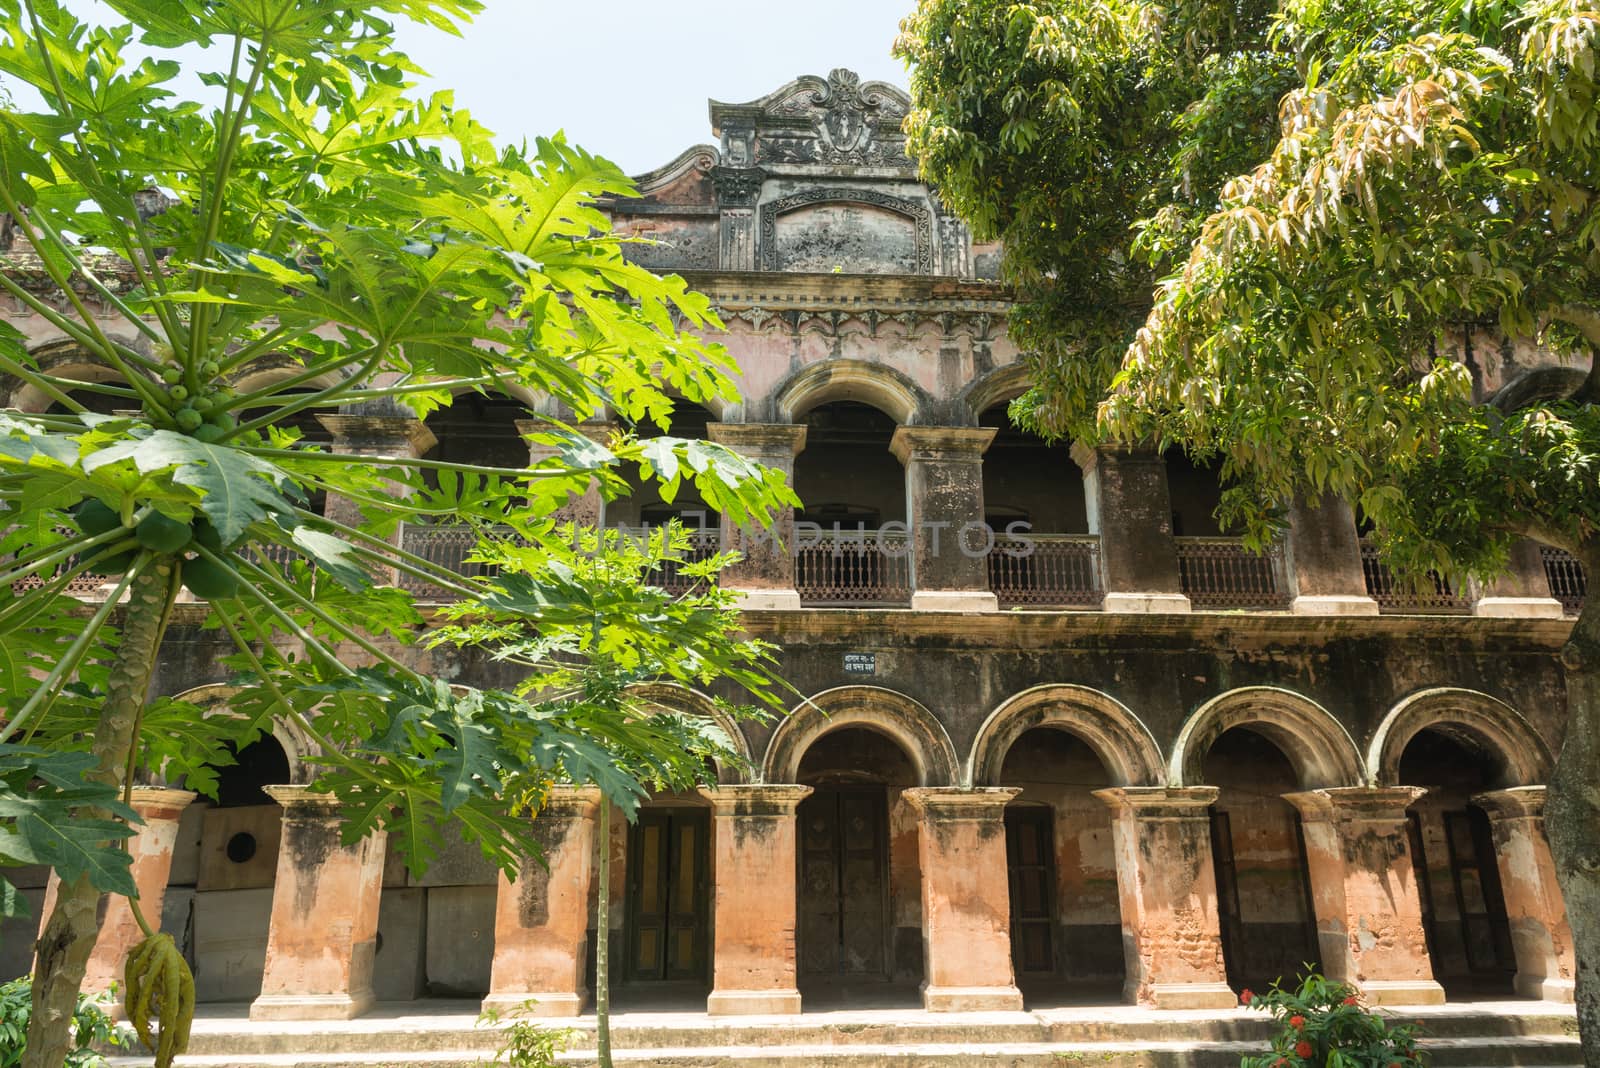 Manikgonj, Bangladesh - August 8: The great Baliati Zomidar Bari is located at the Saturia Upozila of Manikganj district. Name of the village is Baliati. This building is about 200 years of old. Gobinda Ram Shaha was the settler of the Zomidari at Baliati. He was a salt merchant. His forefather was poor and started small business. Later he owned that from his parent. Then he extended that business further and established Zomidari.
Photo taken on: August 8, 2014